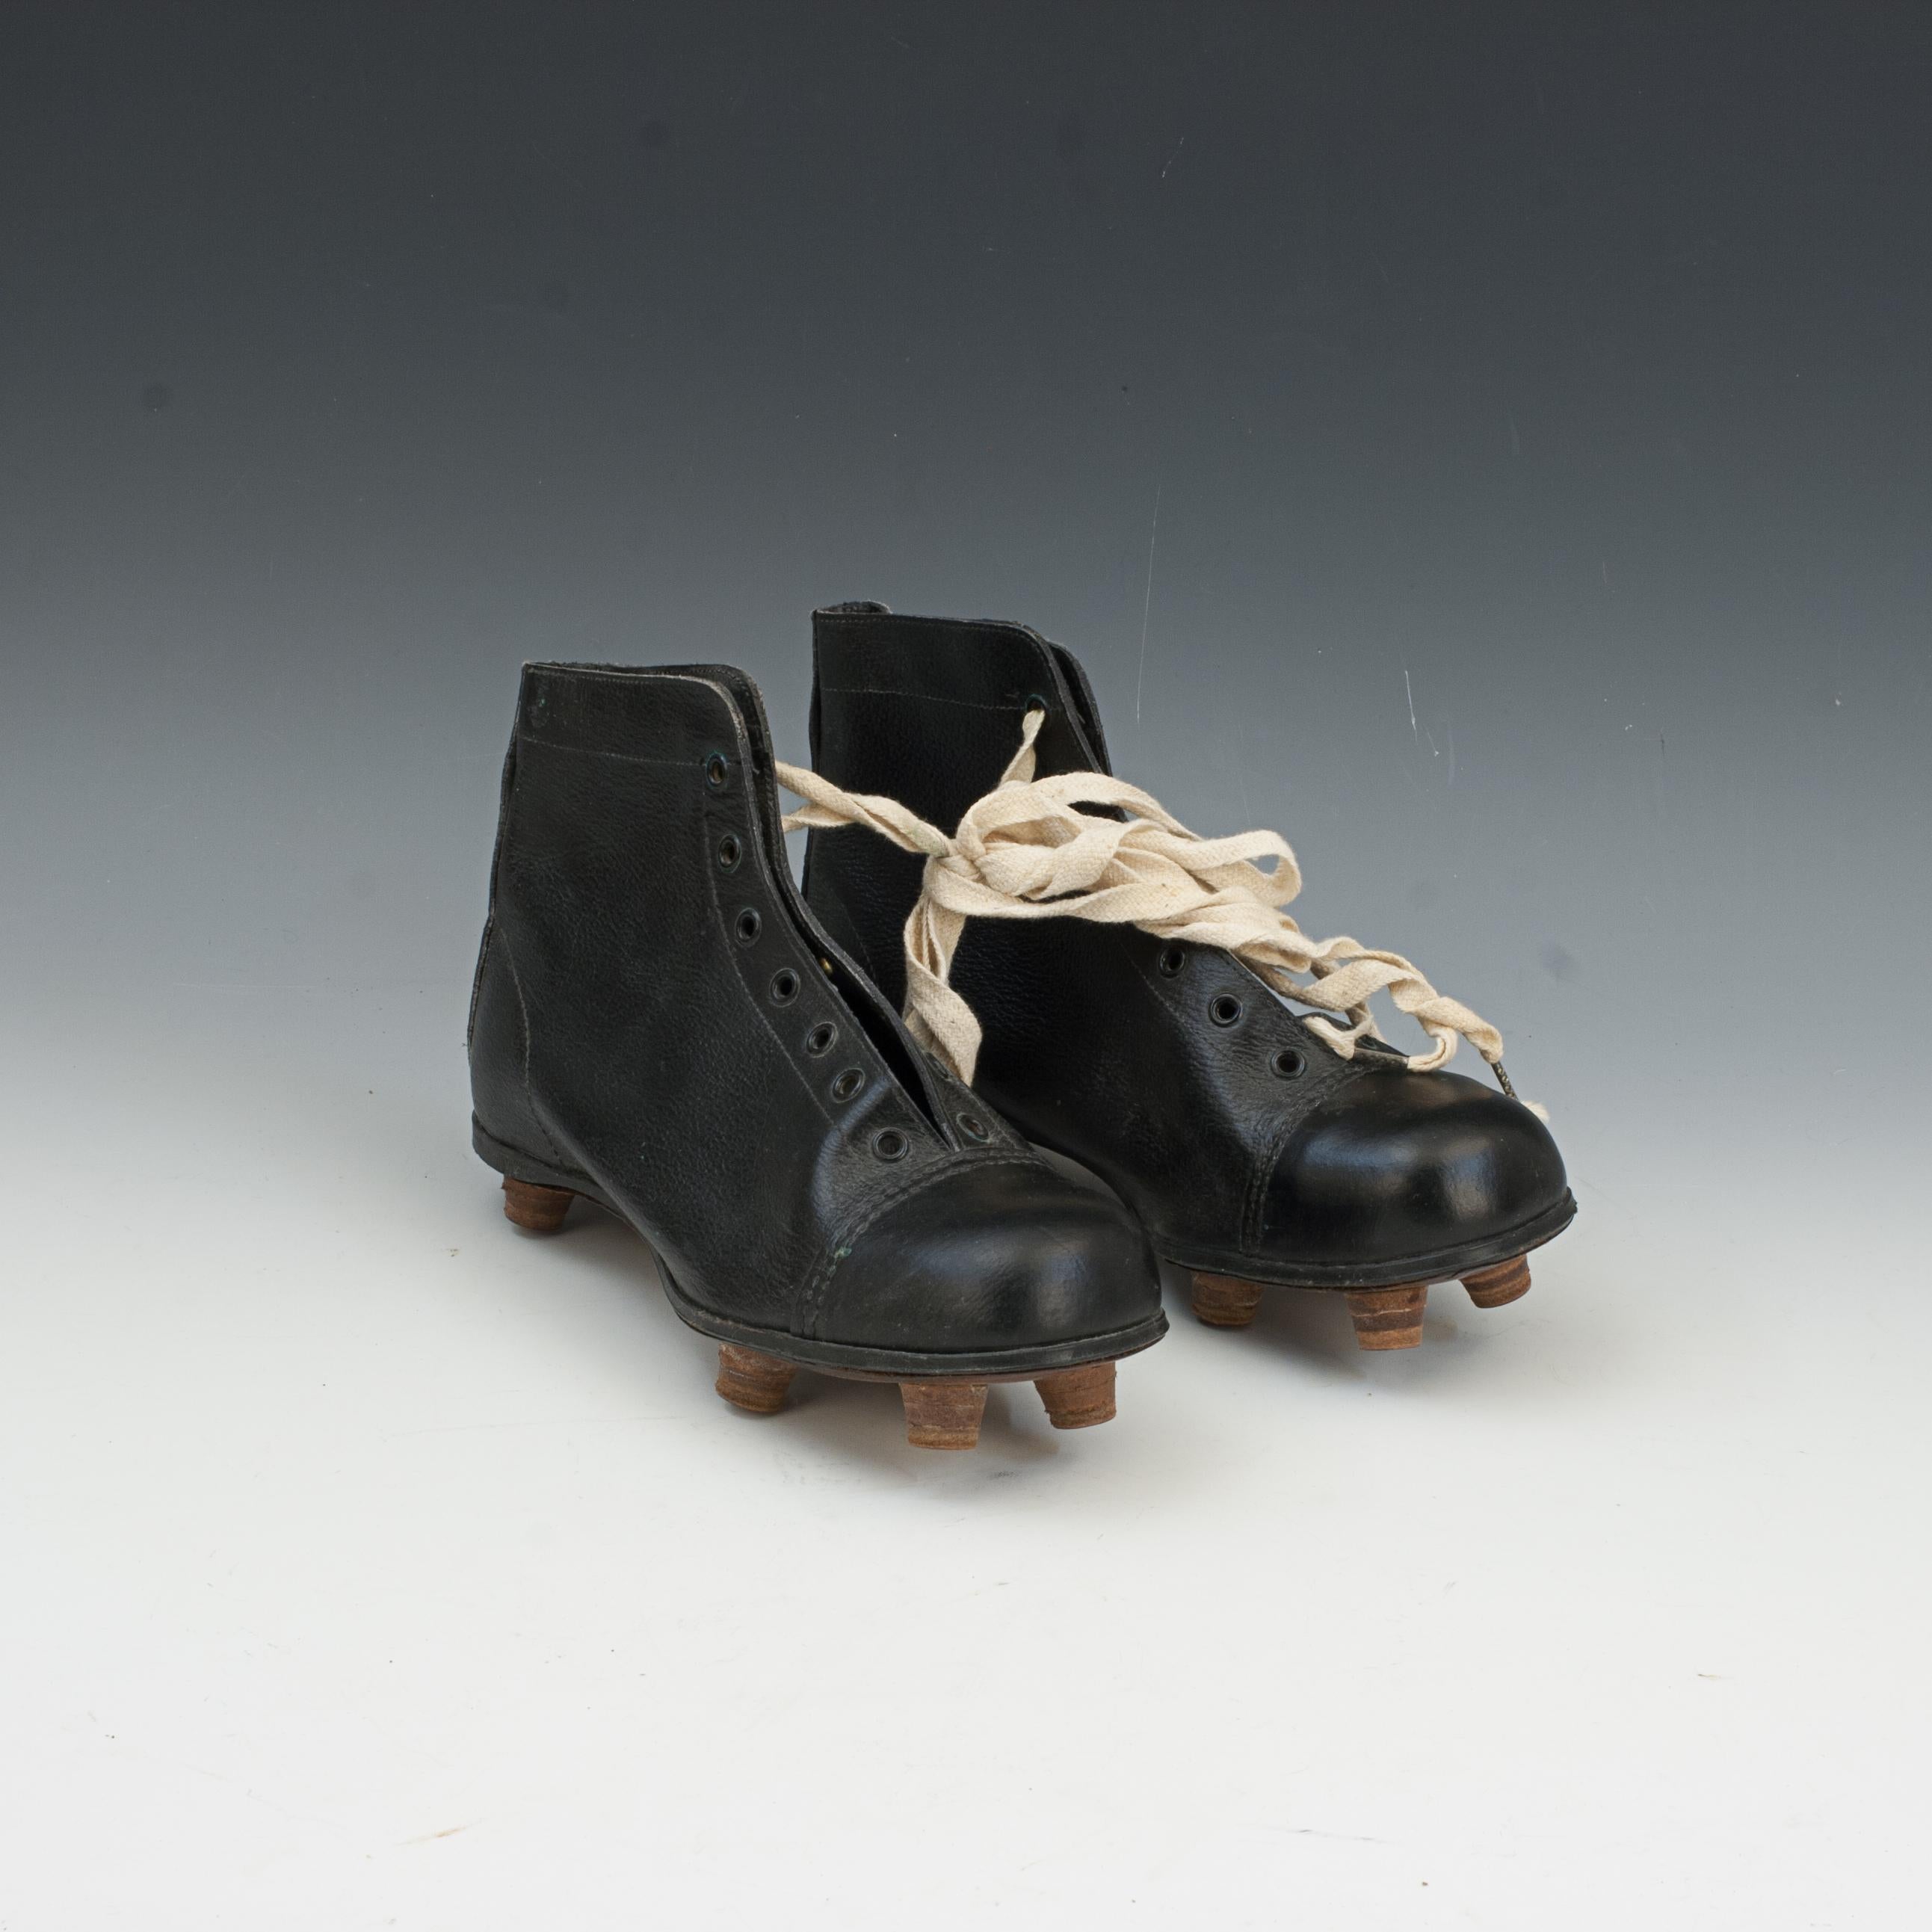 Vintage Pair Of Wheatsheaf Leather Football Boots.
A pair of 'Wheatsheaf' size 4 black leather football/rugby boots in unused condition. This beautiful pair of leather boots are in excellent condition, sole stamped '4, BEND-SOLE' and a C.W.S trade